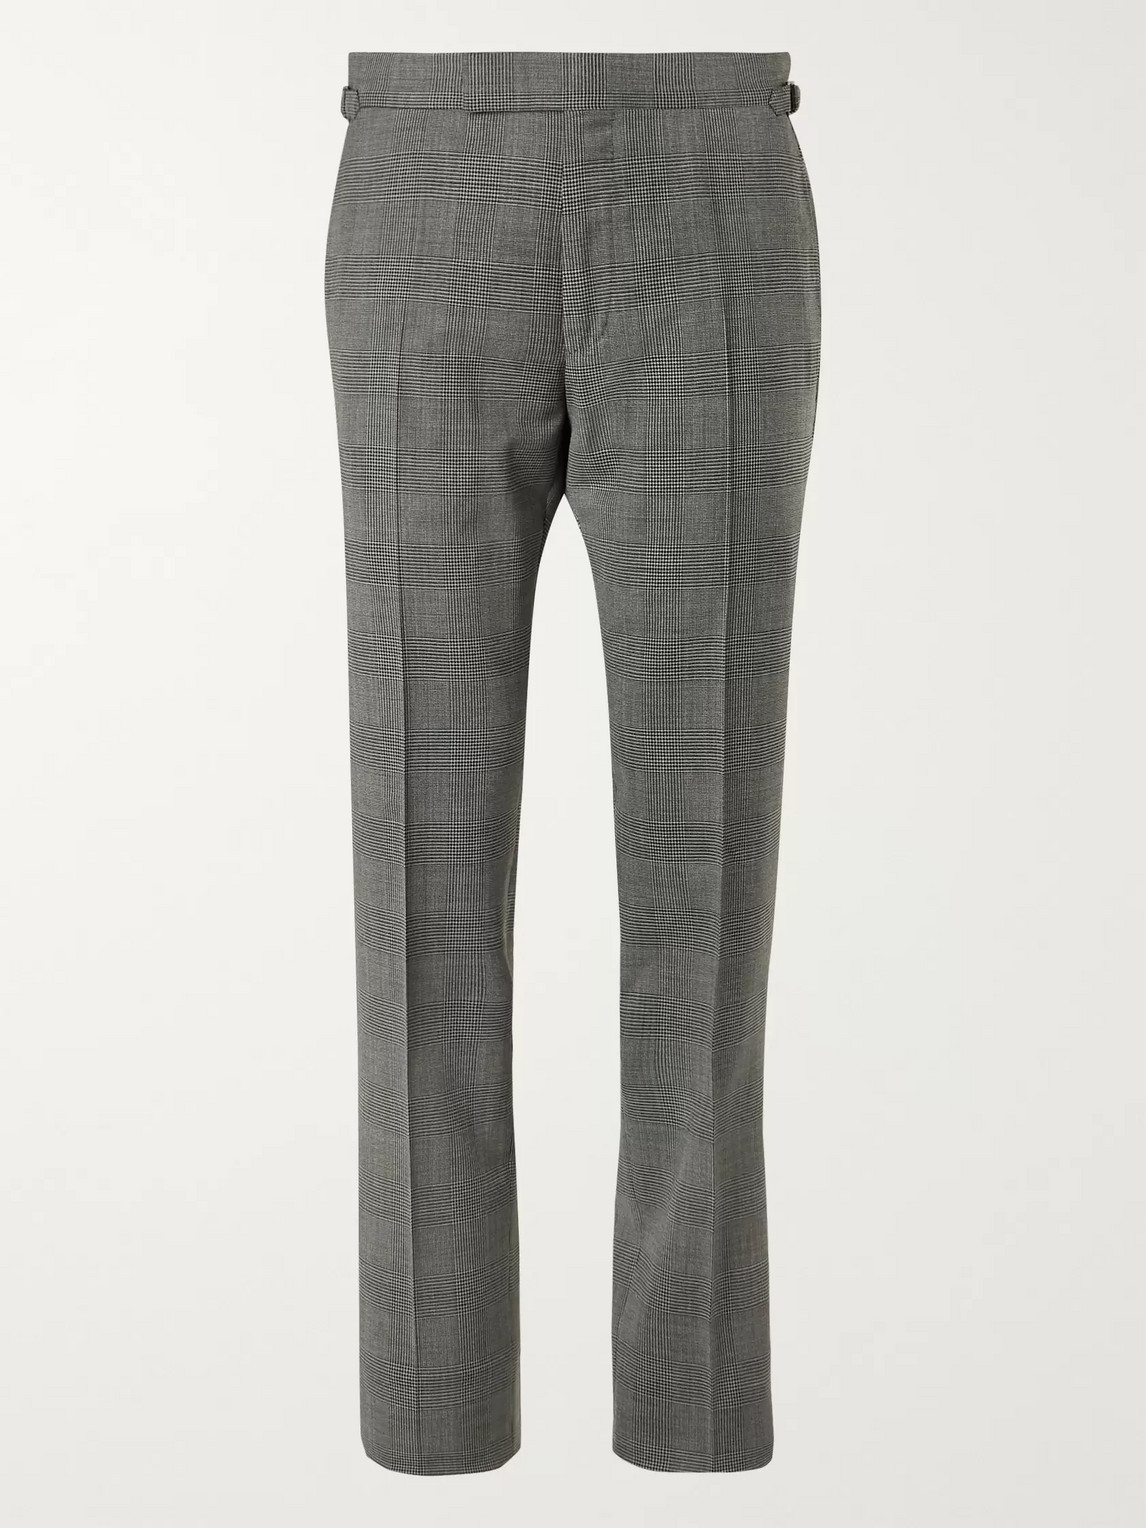 TOM FORD O'CONNOR PRINCE OF WALES CHECKED WOOL-BLEND SUIT TROUSERS